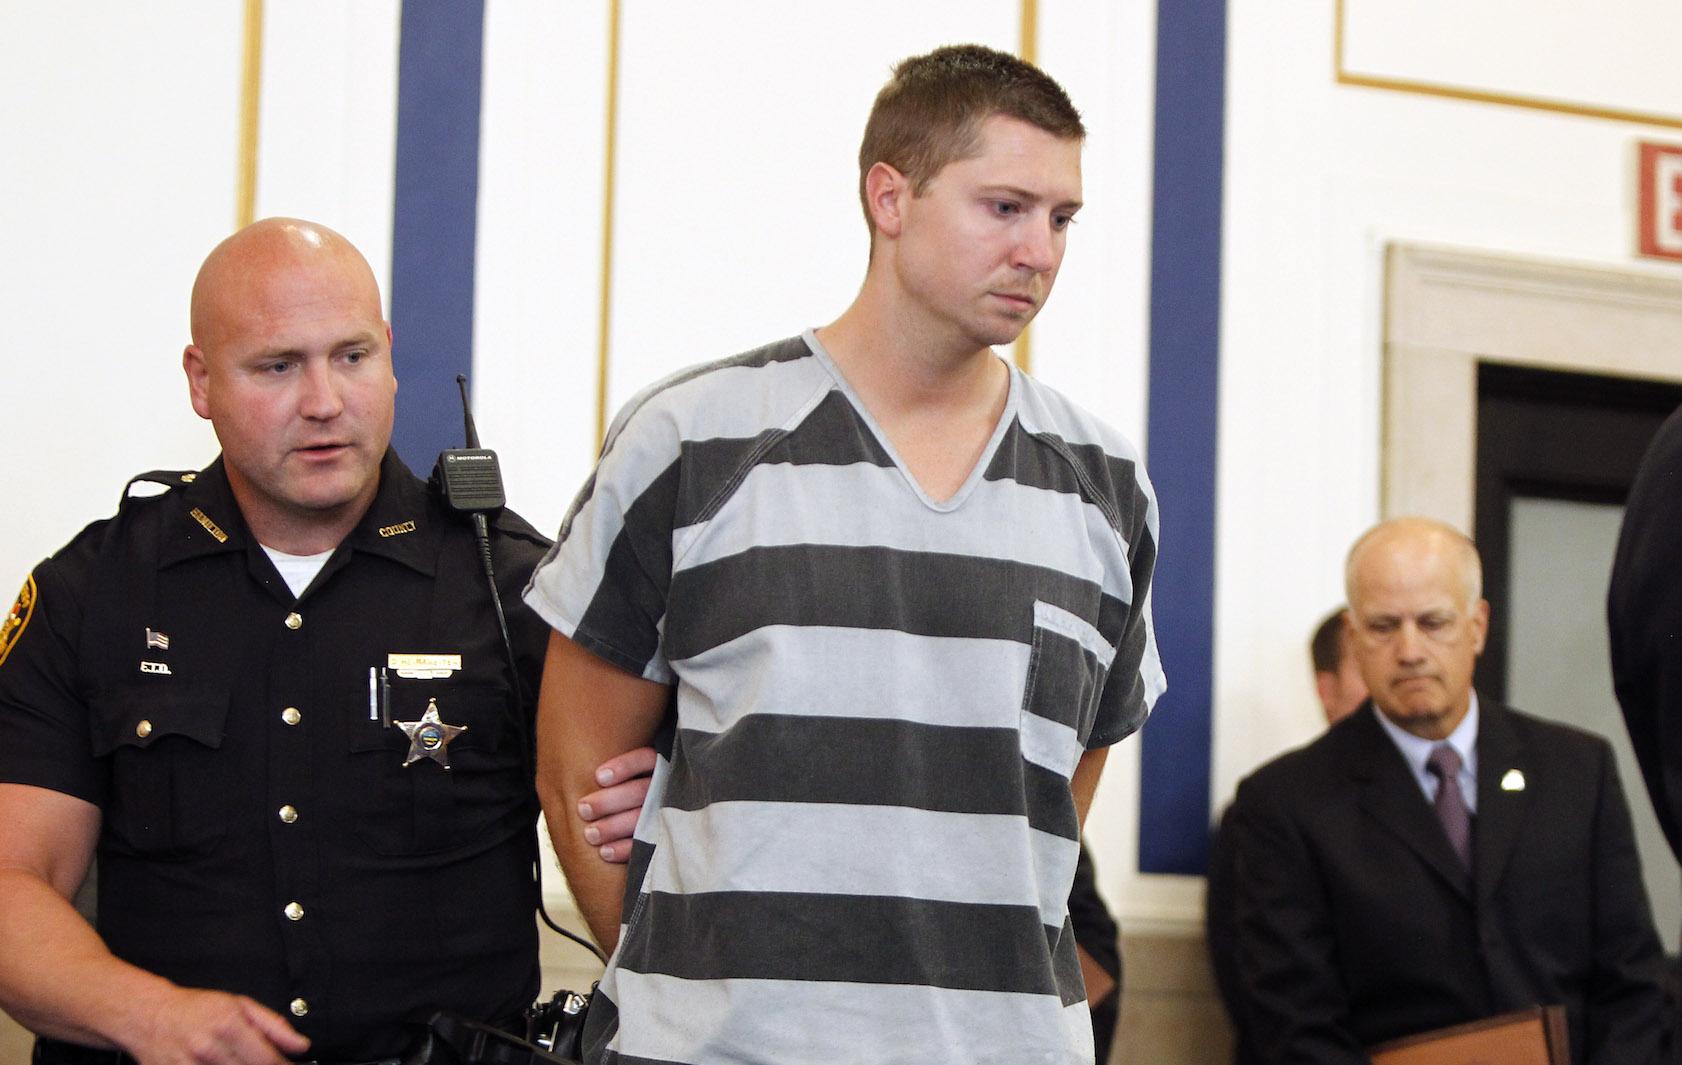 Former University of Cincinnati police officer Ray Tensing enters Hamilton County Common Pleas Court to be arraigned on murder charges July 30, 2014 in Cincinnati, Ohio. Tensing pleaded not guilty in the shooting death of Samuel Dubose during a routine traffic stop on July 19. Bond was set at $1 million.